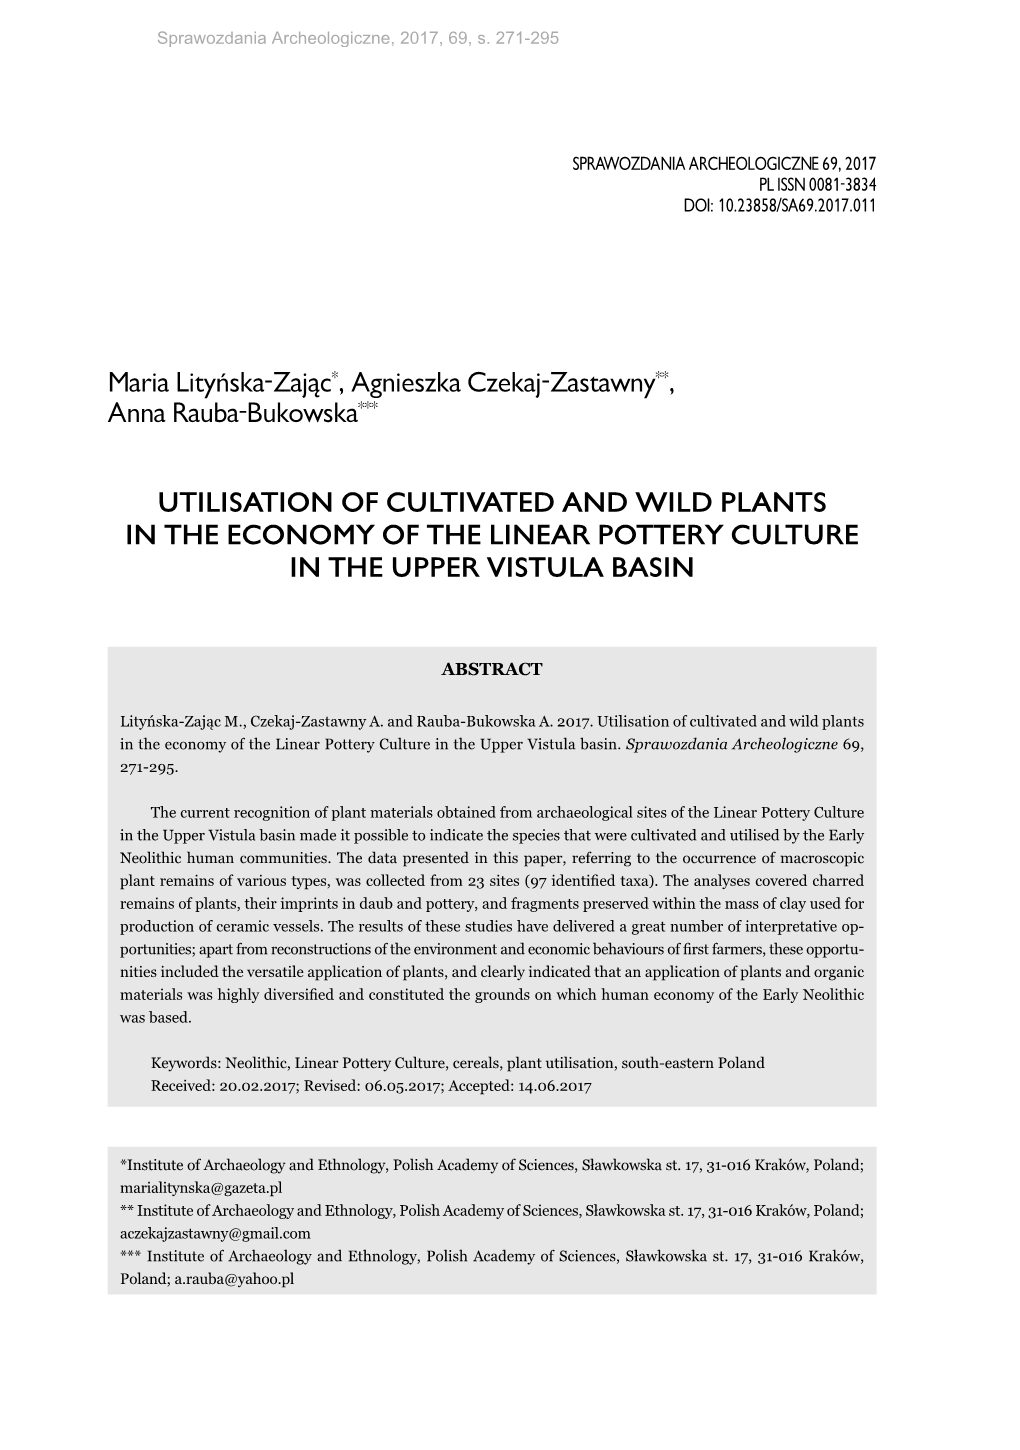 Utilisation of Cultivated and Wild Plants in the Economy of the Linear Pottery Culture in the Upper Vistula Basin